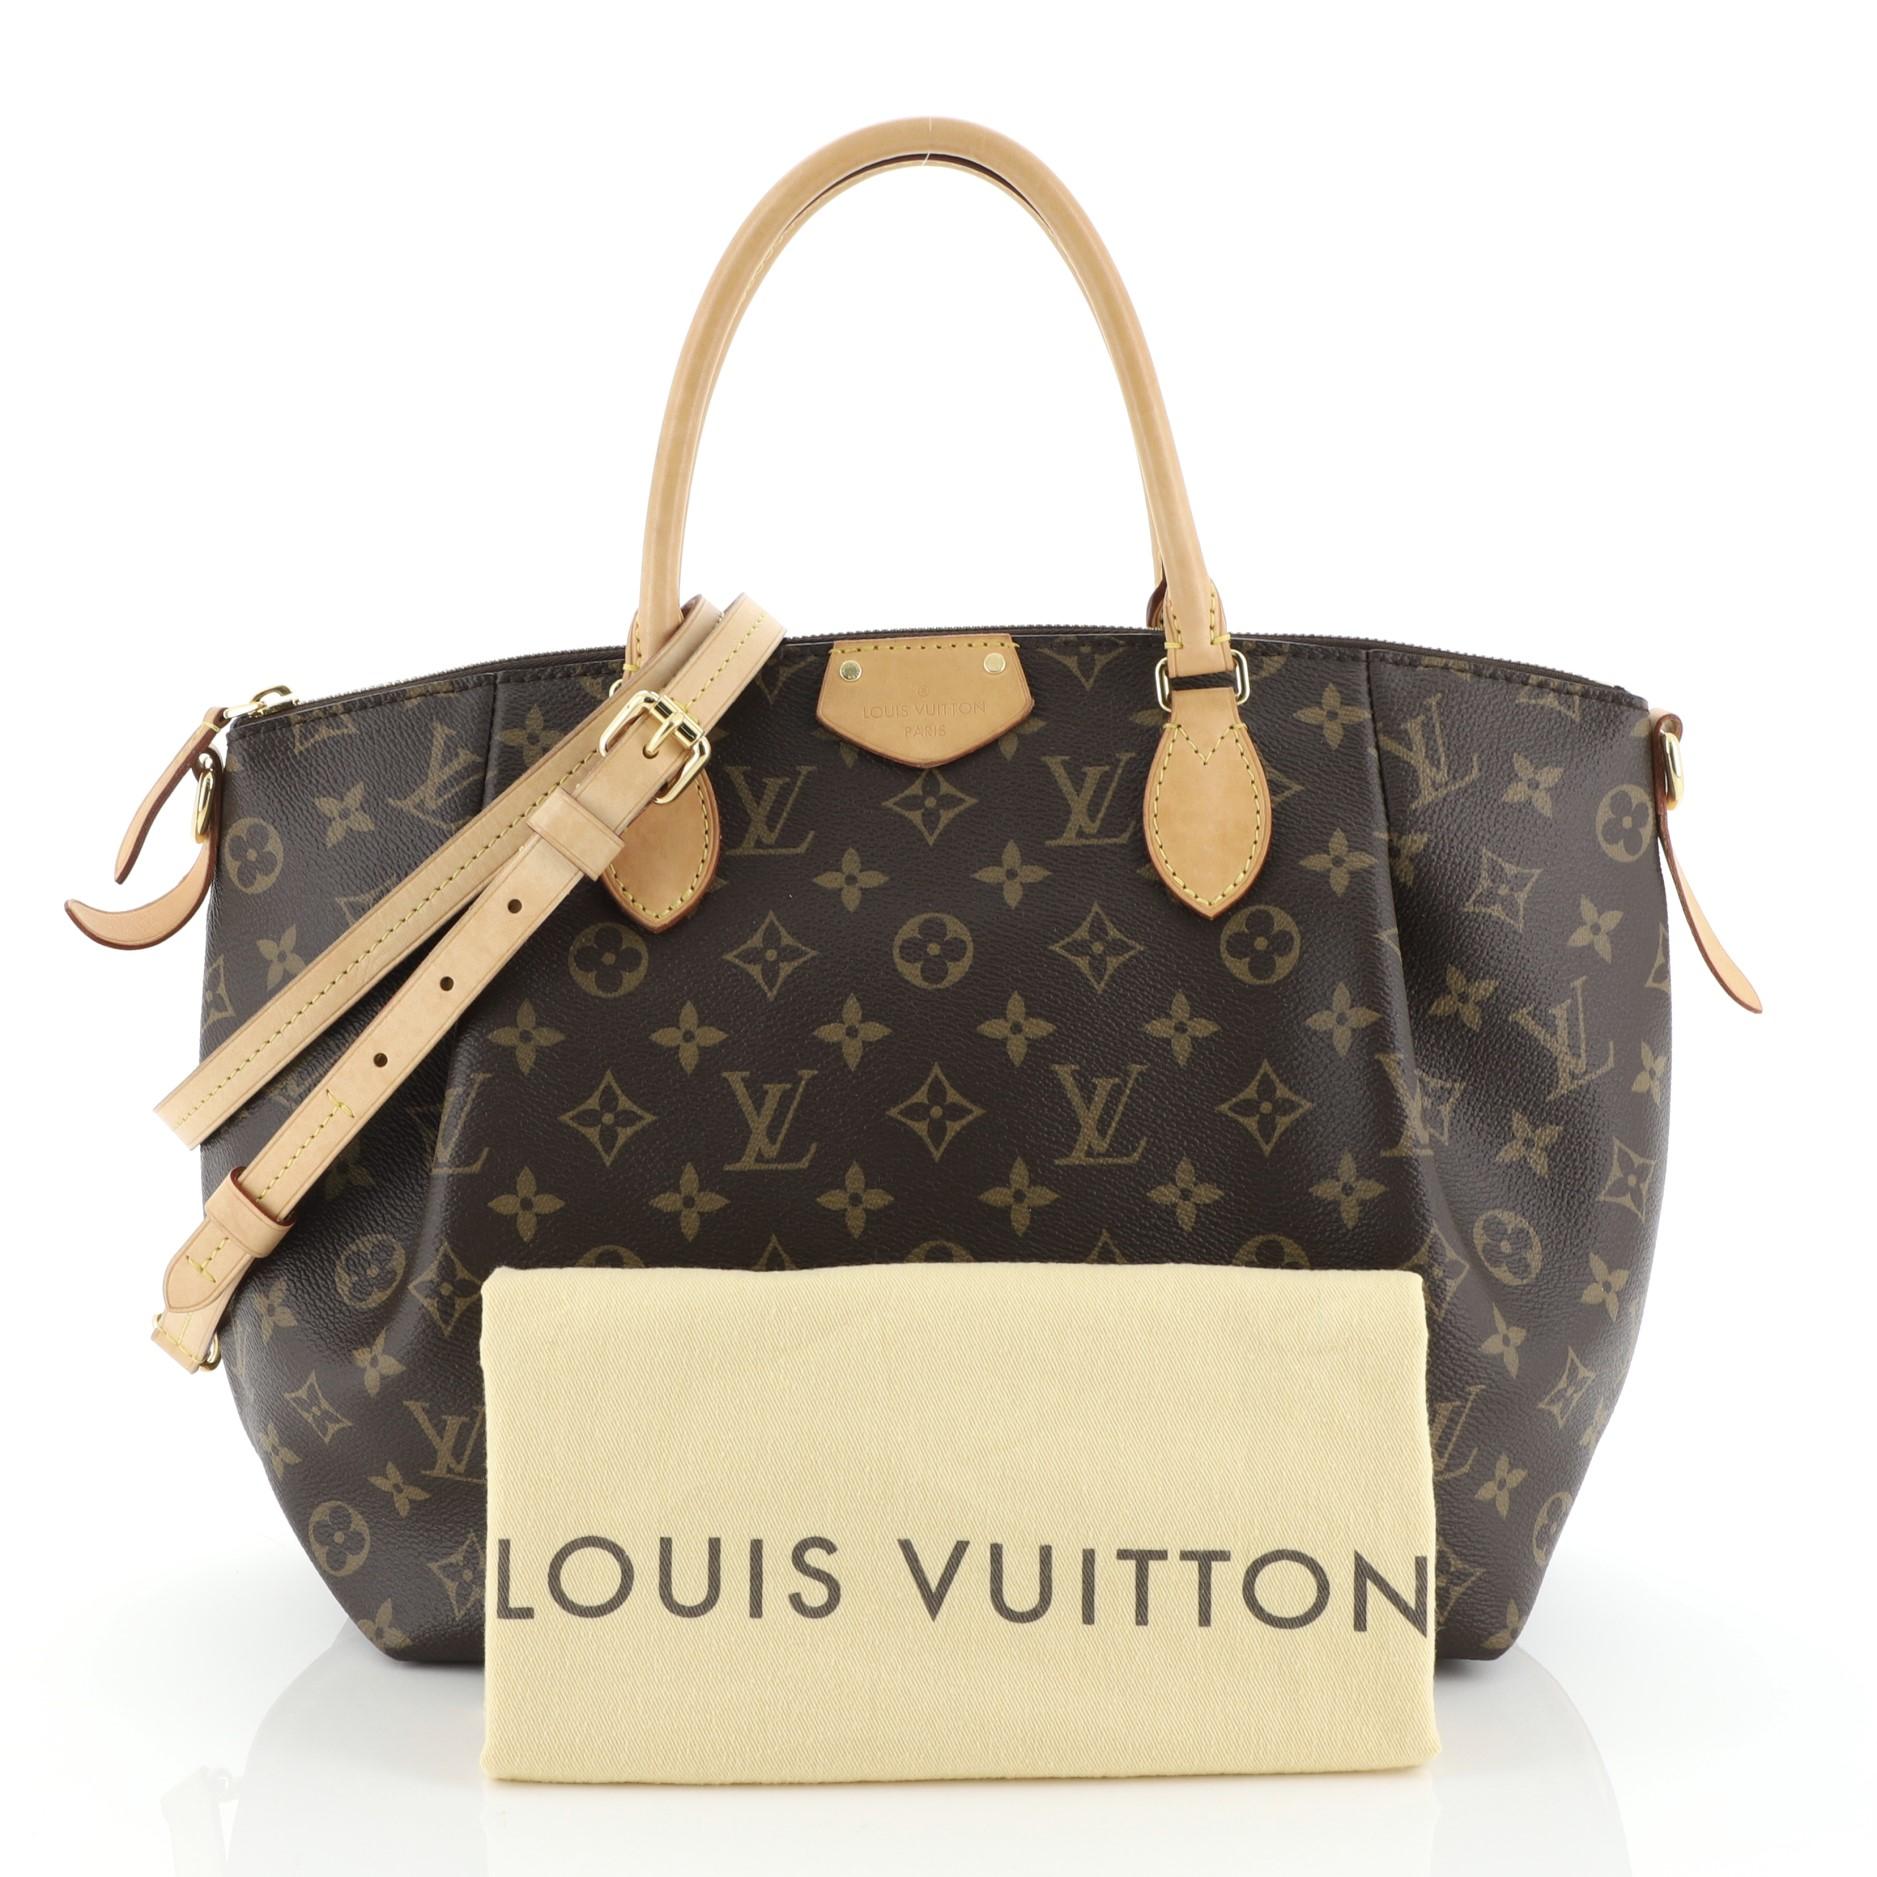 This Louis Vuitton Turenne Handbag Monogram Canvas MM, crafted in brown monogram coated canvas, features dual rolled leather handles and gold-tone hardware. Its zip closure opens to a purple fabric interior with slip pockets. Authenticity code